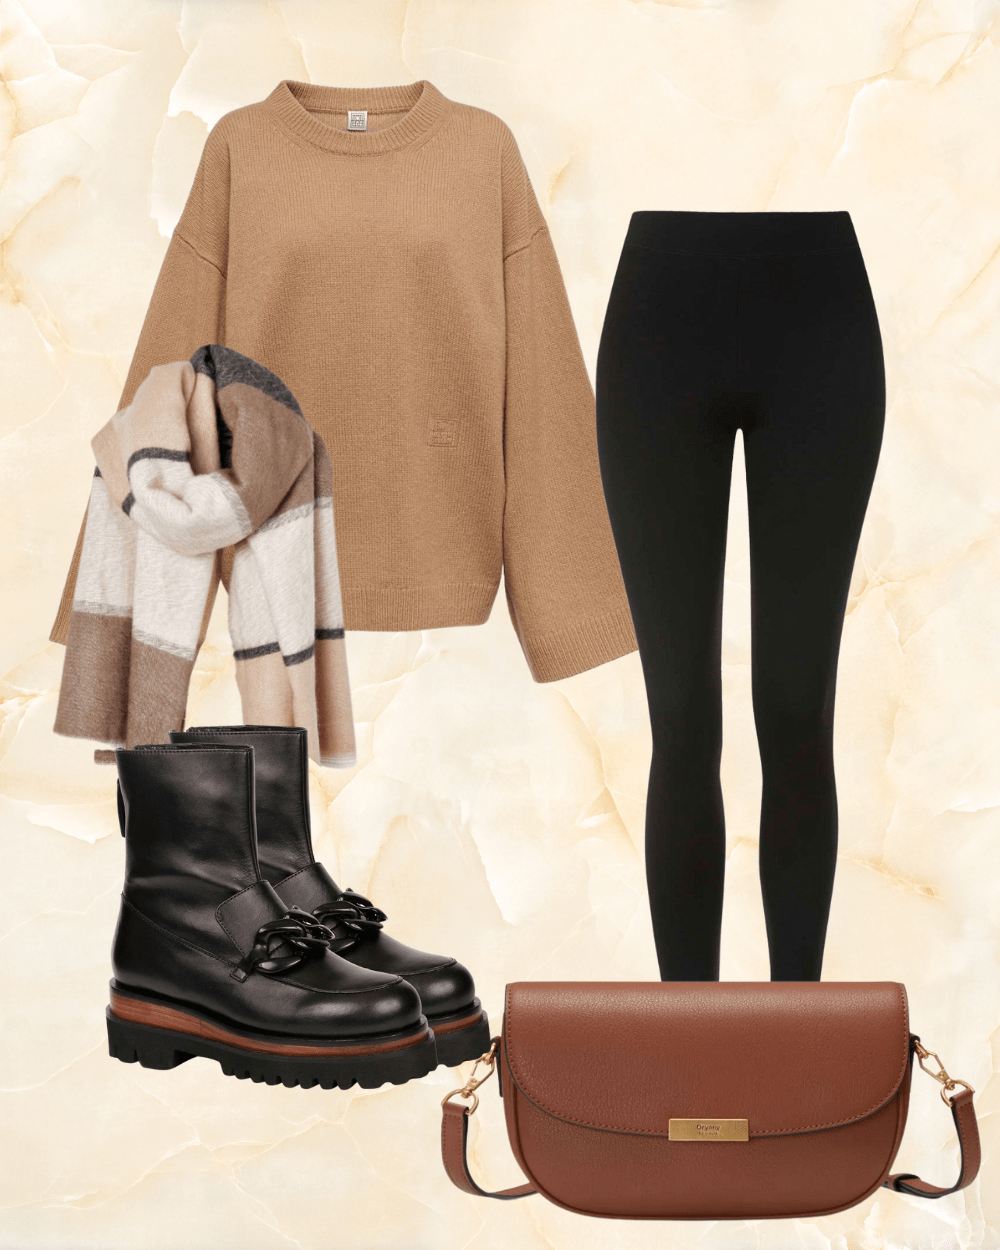 Thanksgiving outfit with Alyson Black Leather Boots and Lena Crossbody Bag in Color Tan